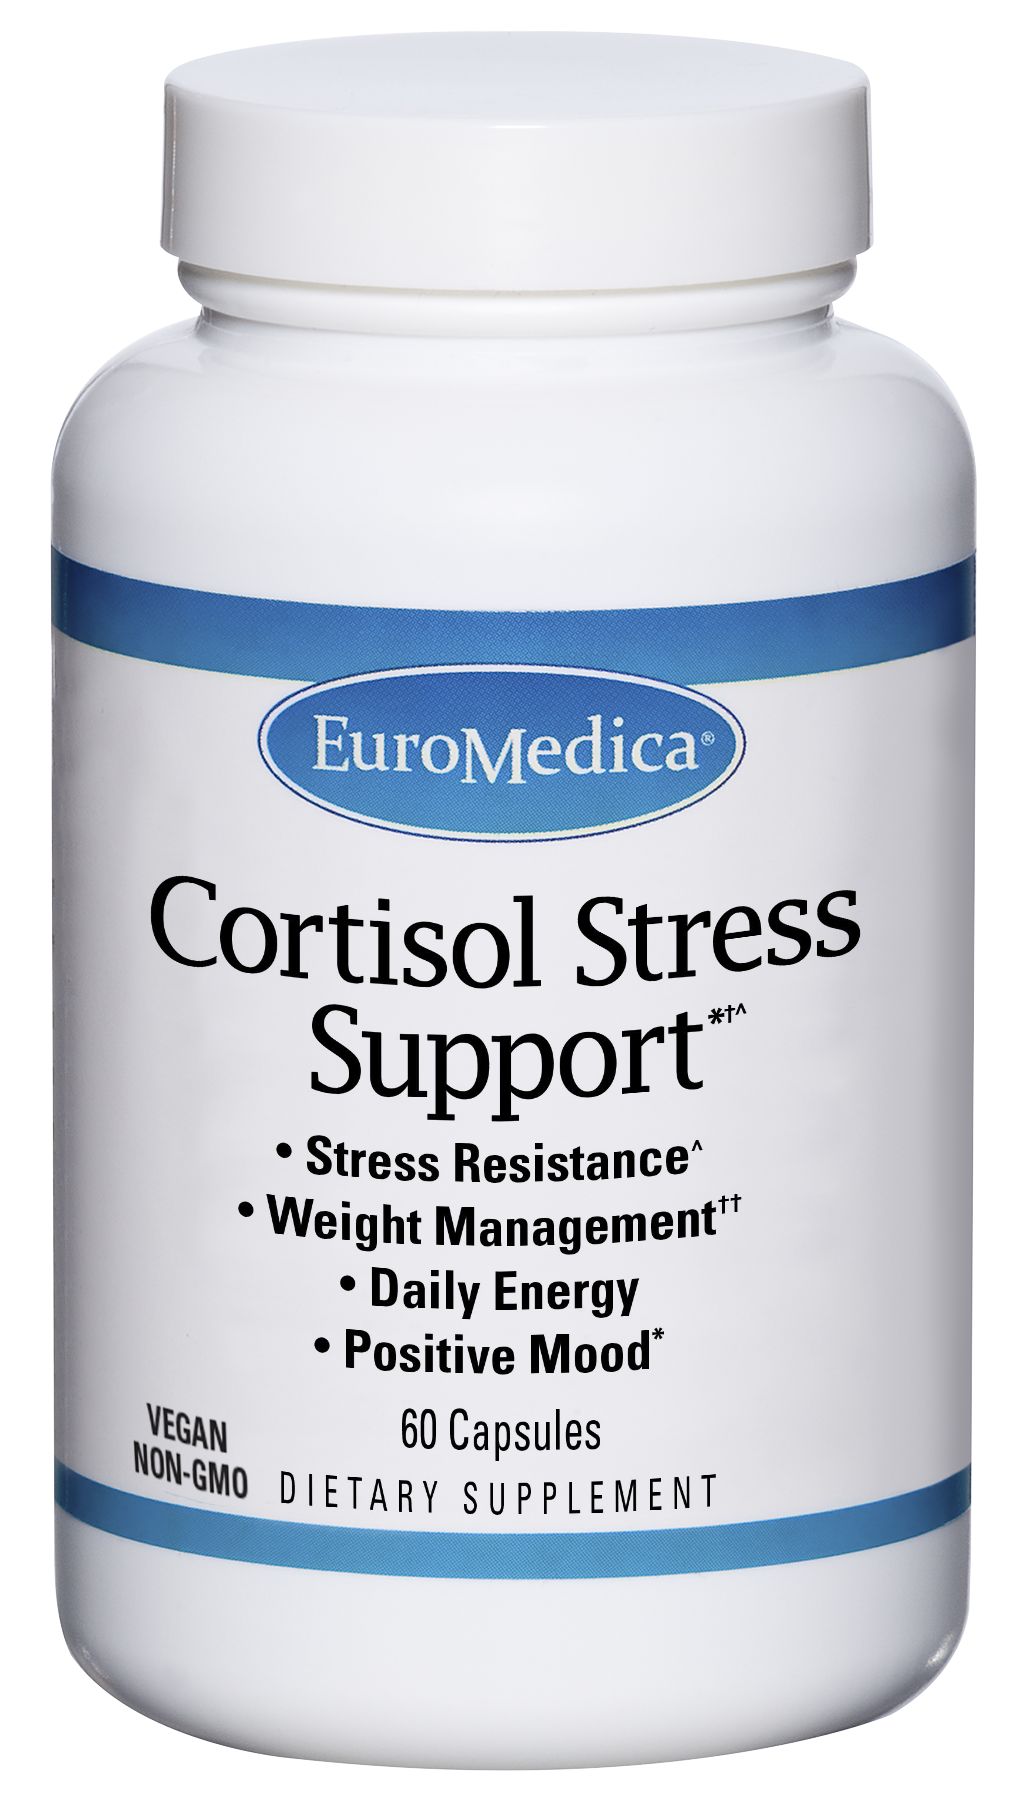 Cortisol Stress Support bottle front